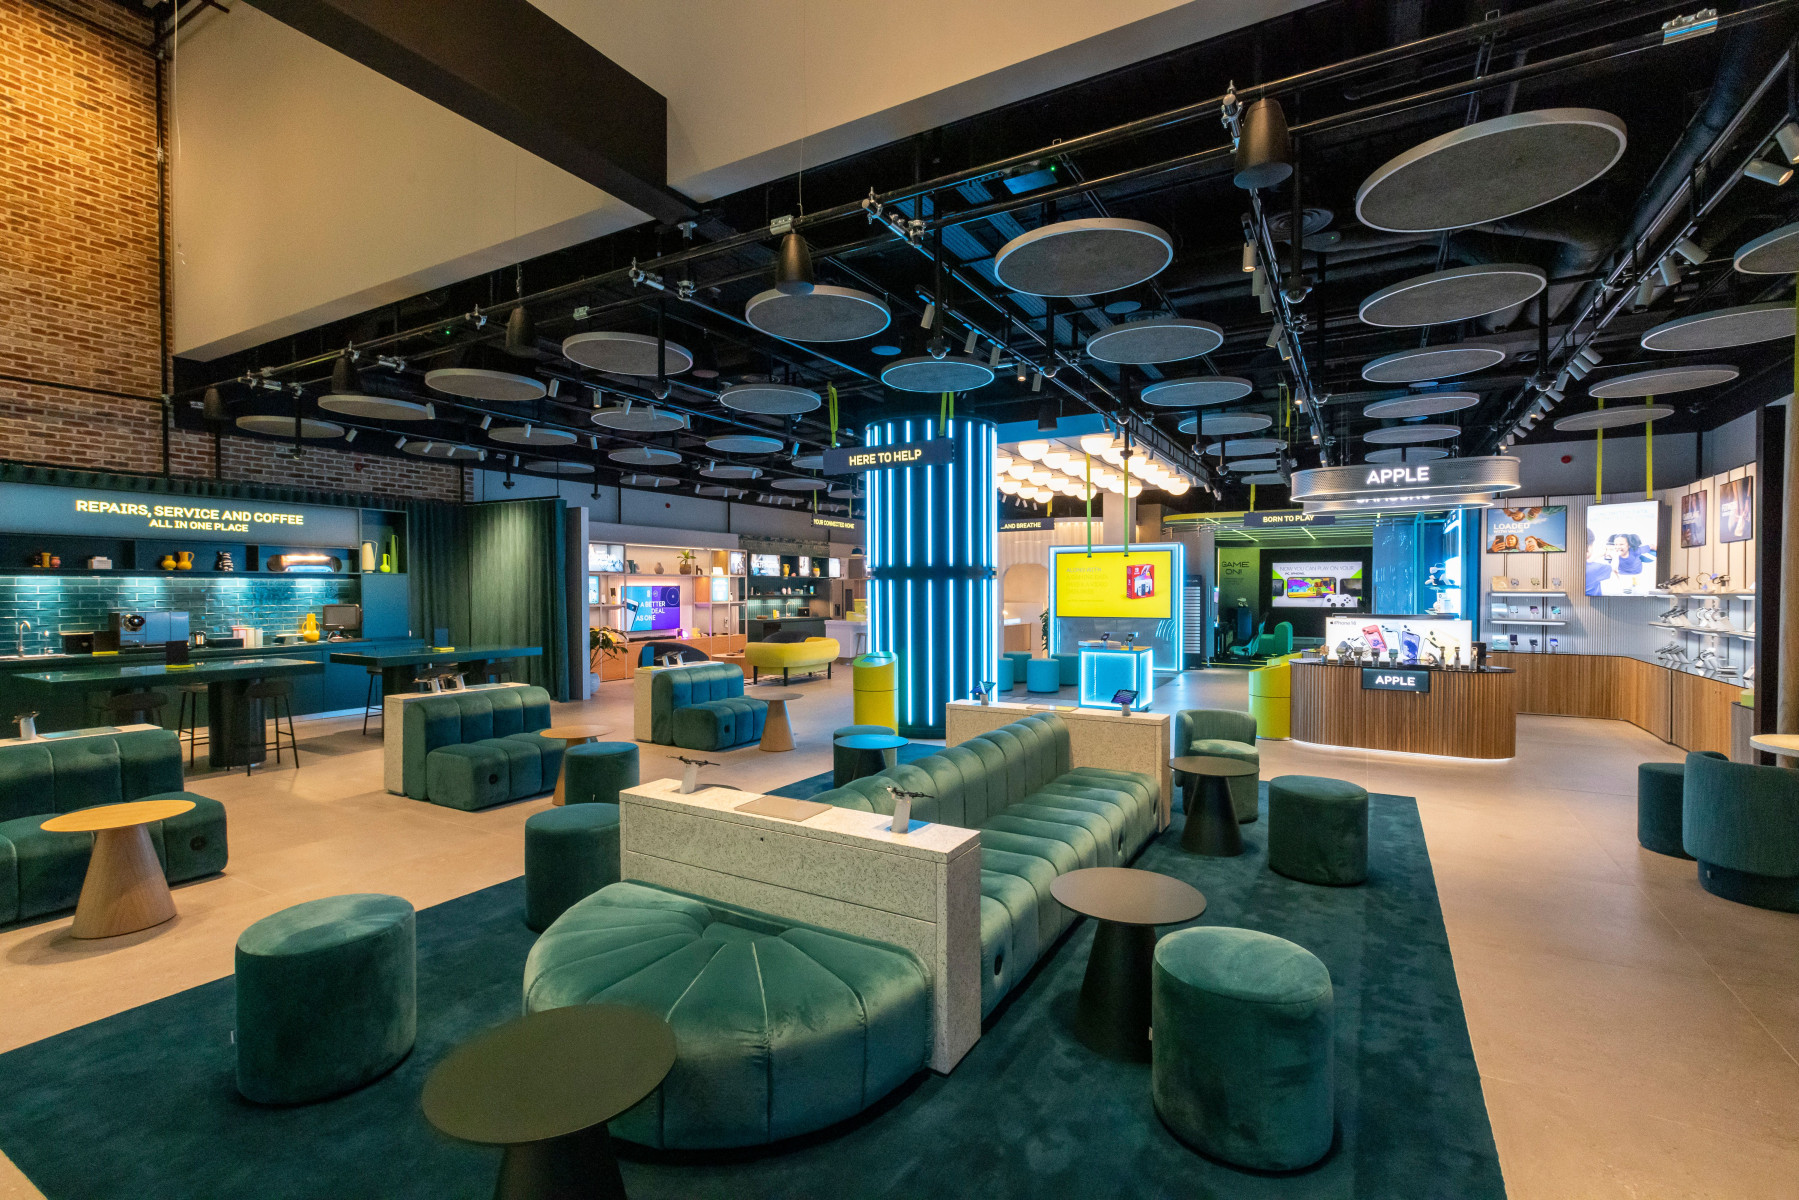 EE Launches Innovative Experiential Studio in London’s Westfield